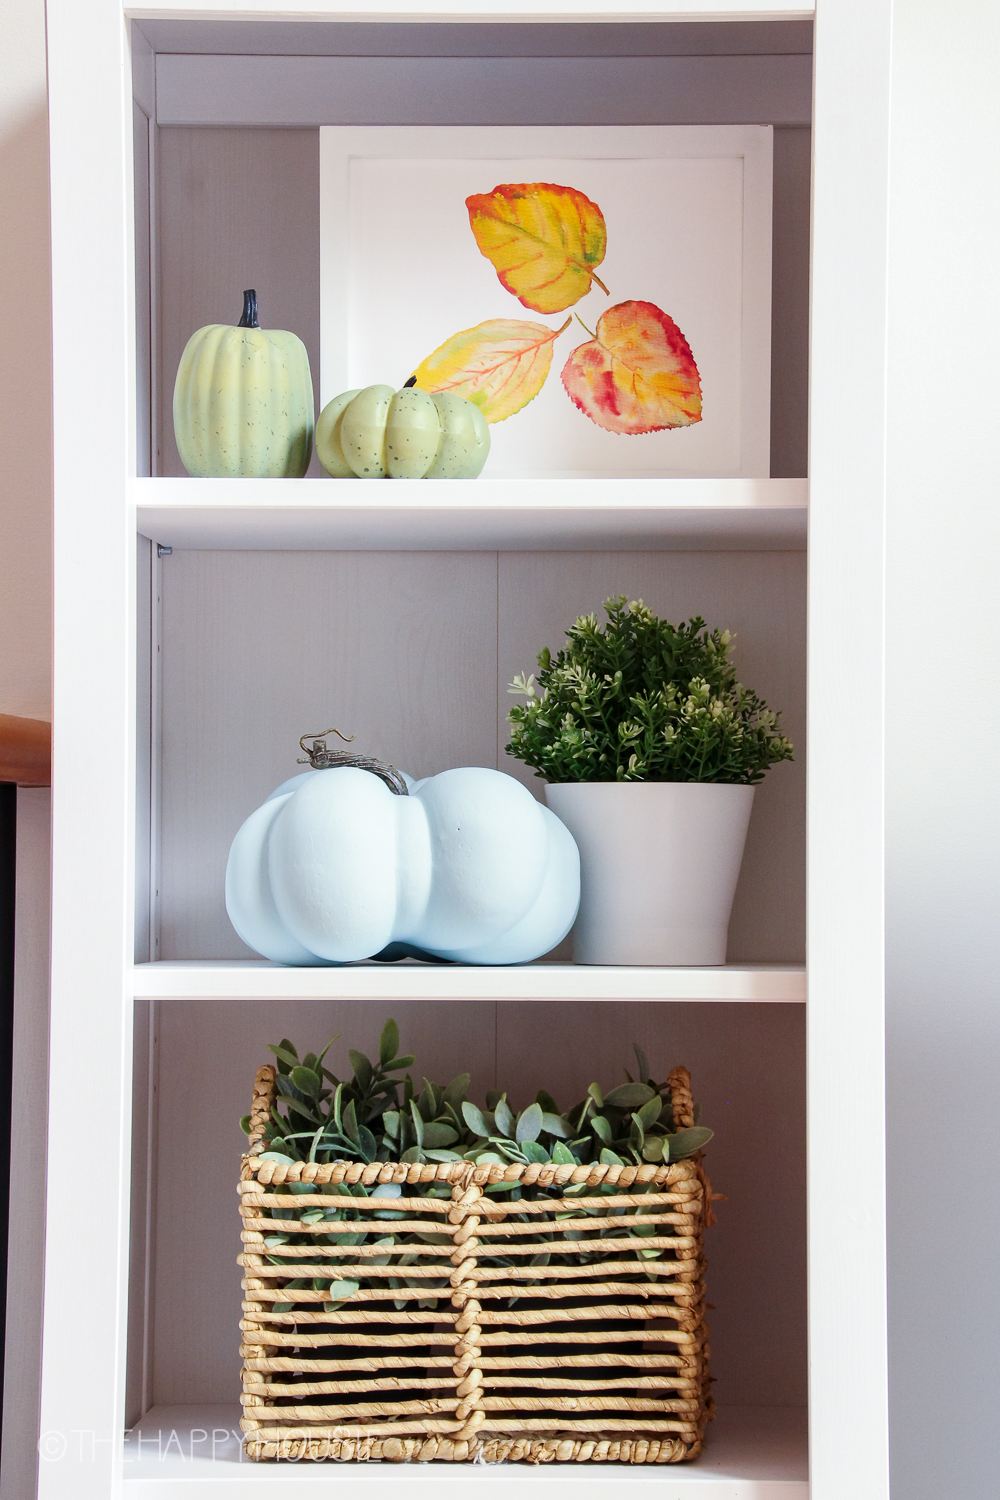 Up close picture of the leaf print in yellow and red, and the pumpkins on the shelf.